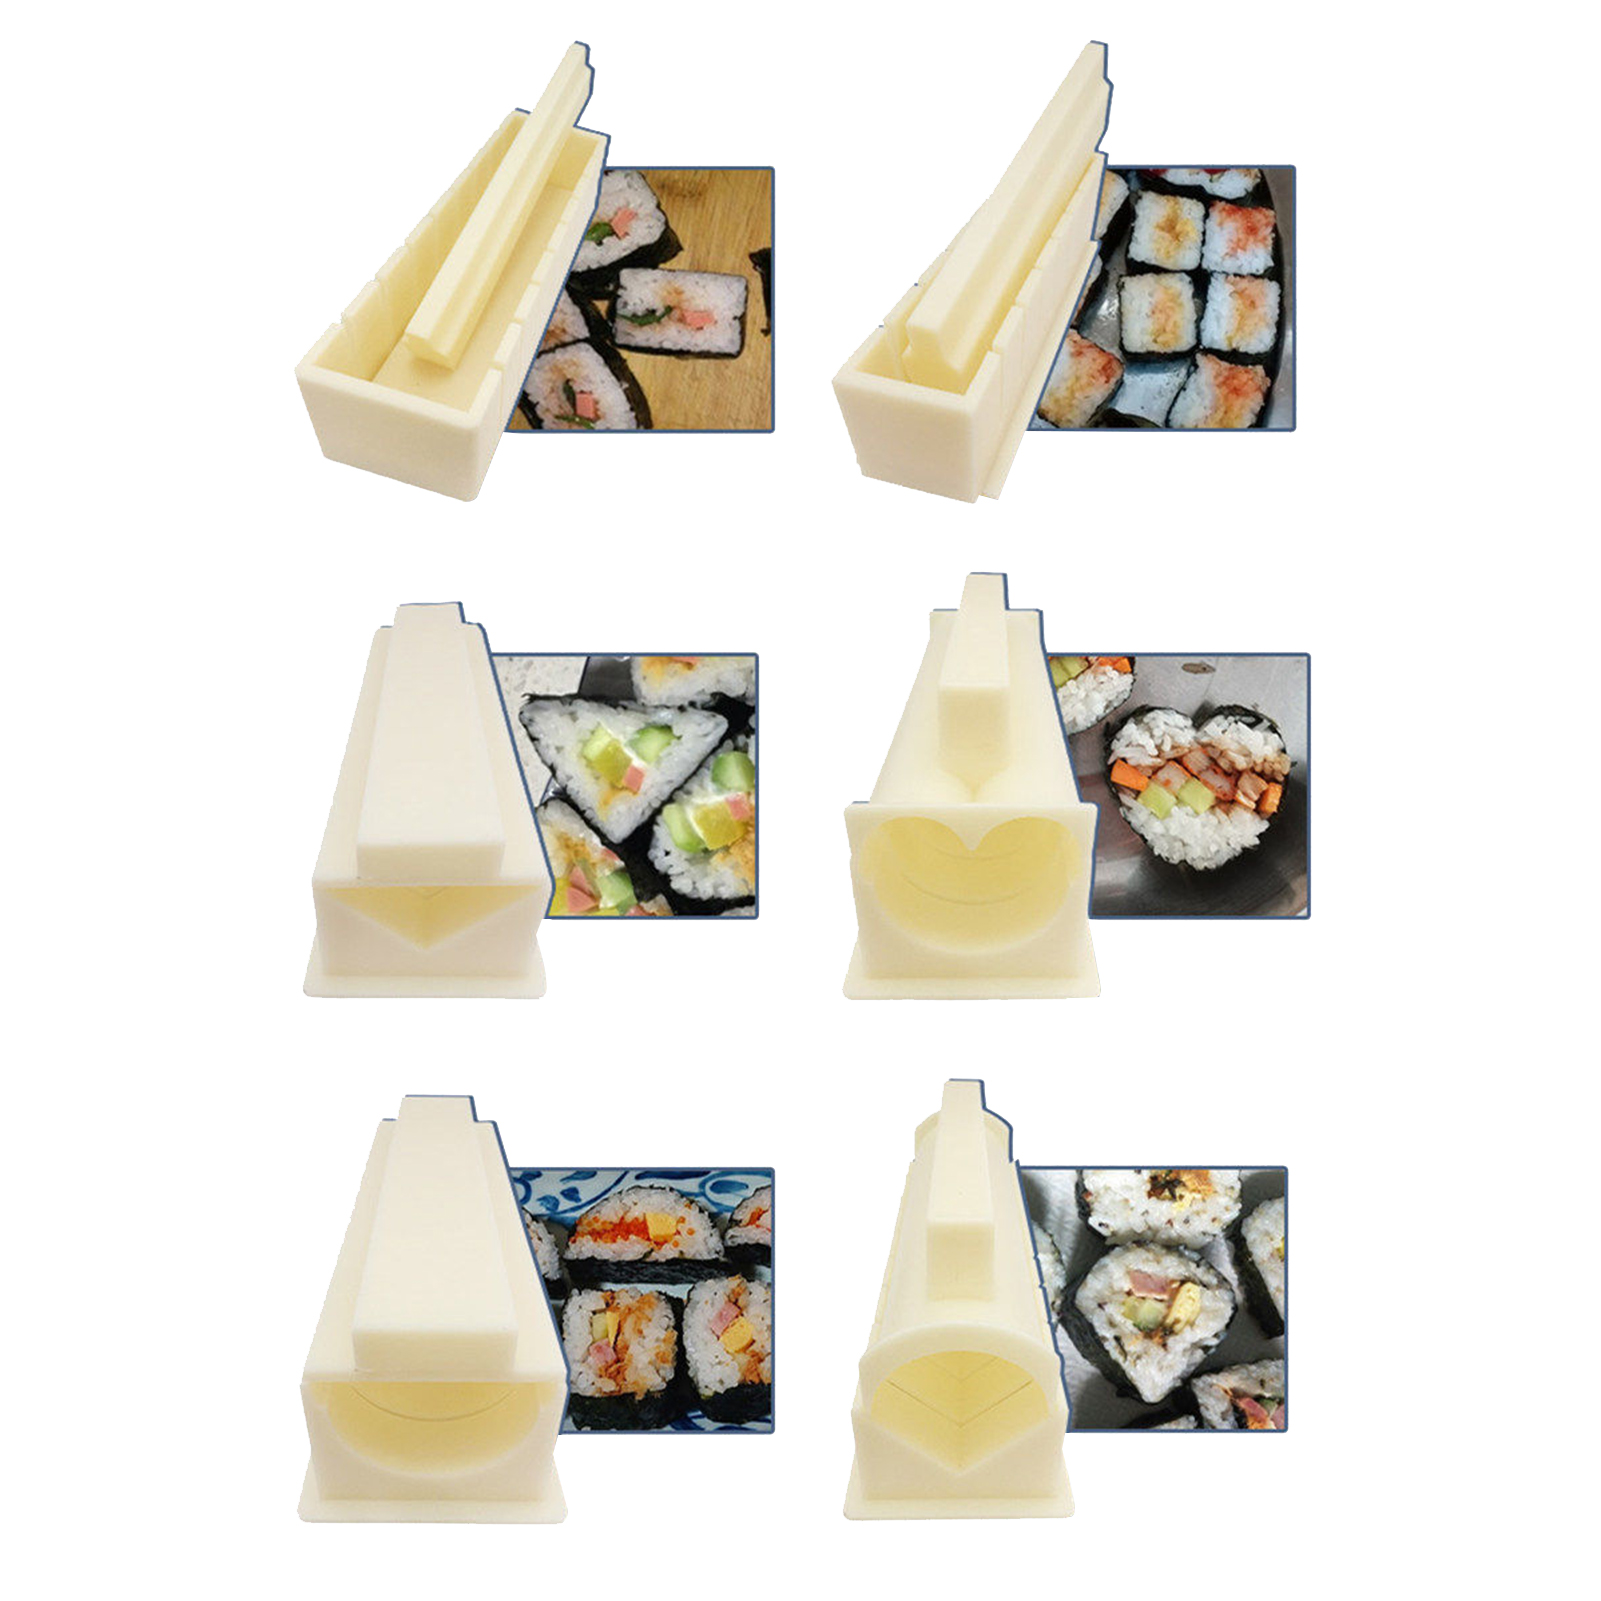 Sushi Maker Mold Bamboo Wooden Roller Rice Sushi Machine DIY Hand Food Pressing Mold Accessories Kitchen Sushi Tool